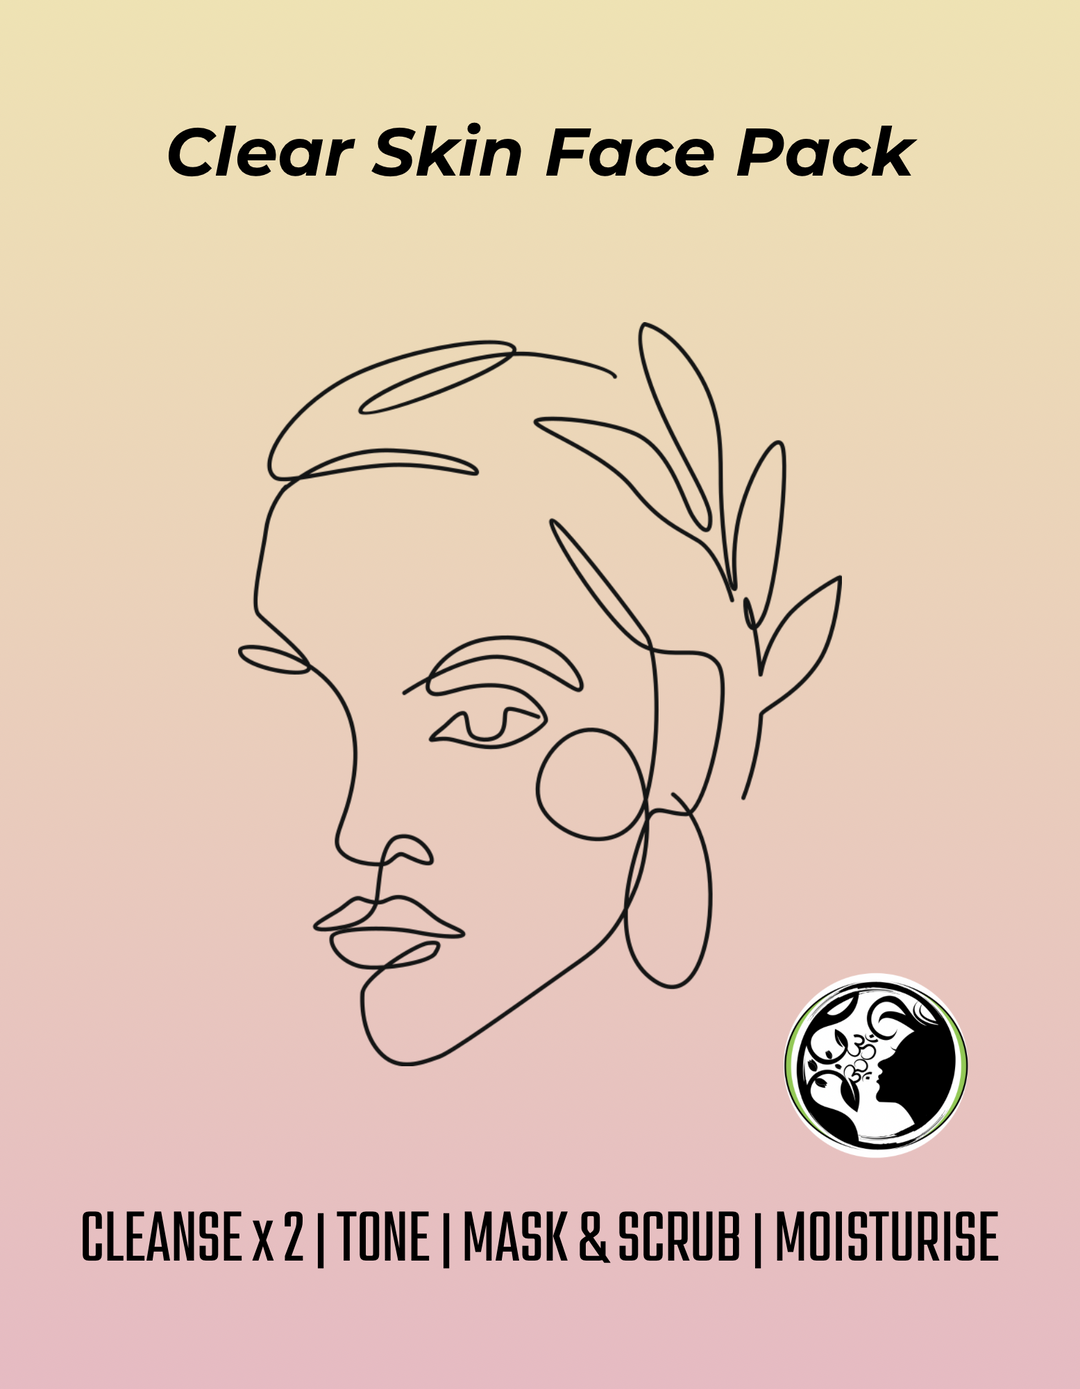 Clear Skin Face Pack